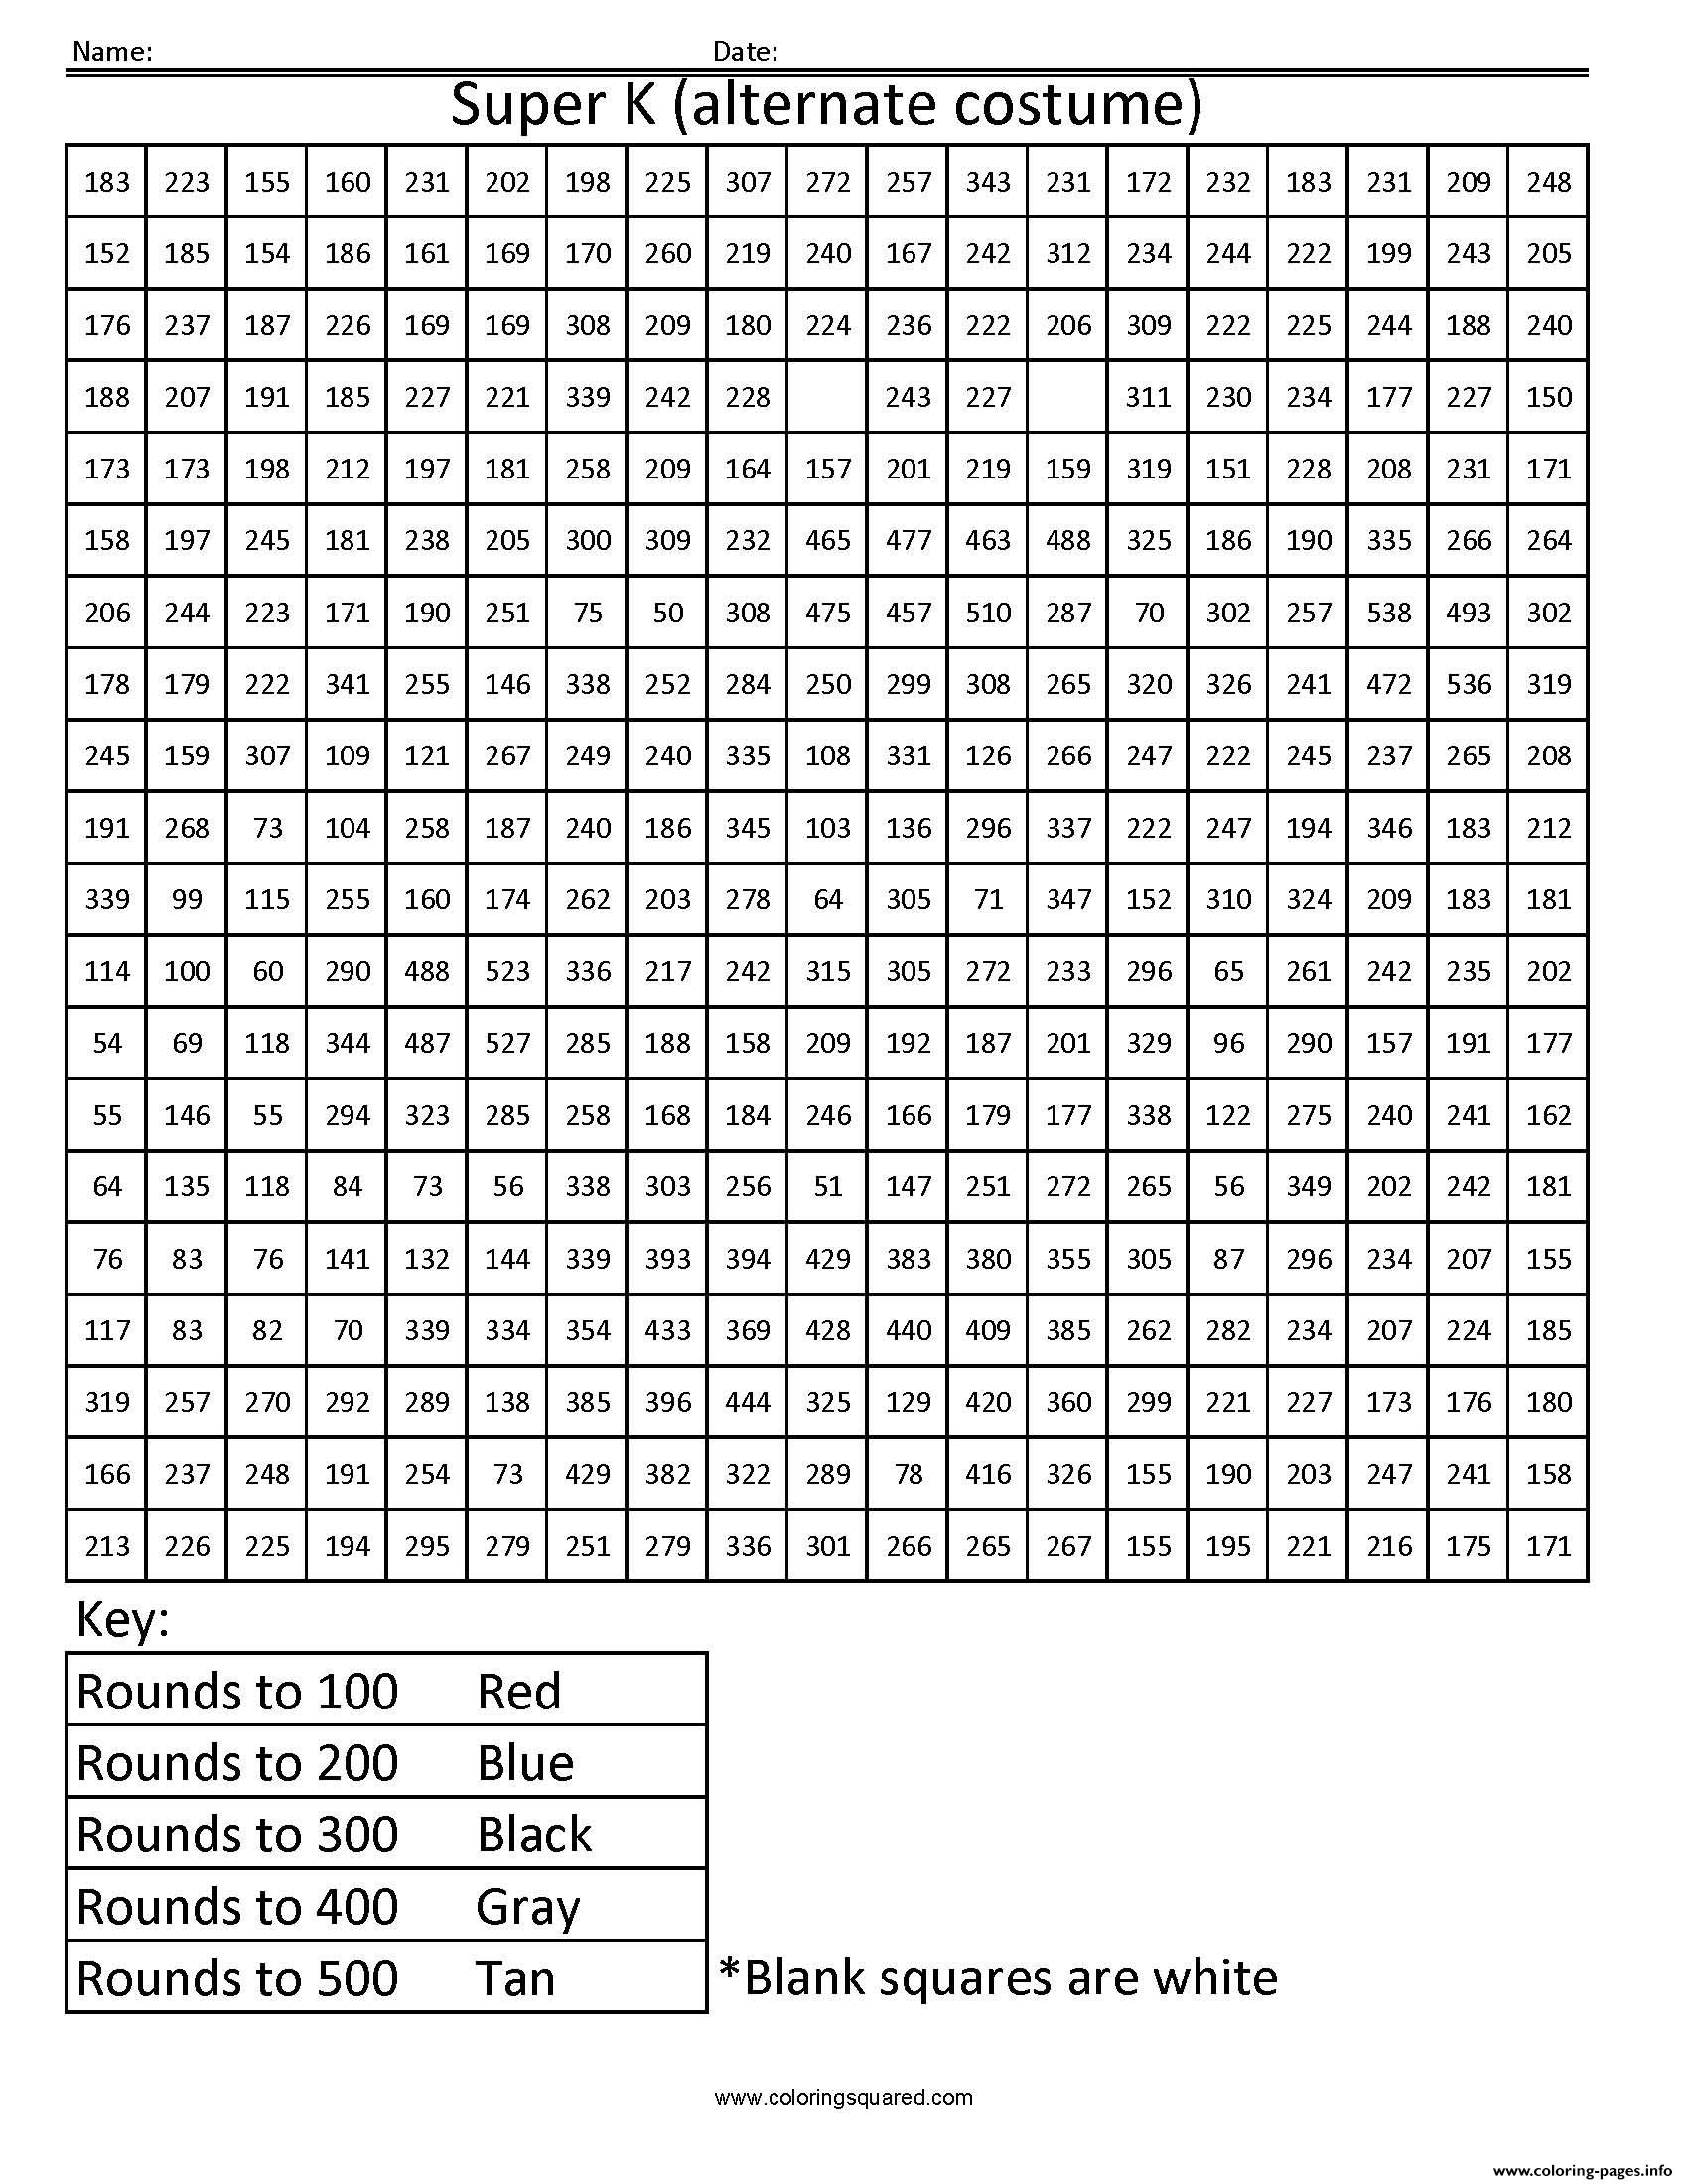 Rounding Worksheets Super K 2 Free Math Pixel Art Coloring Pages Printable